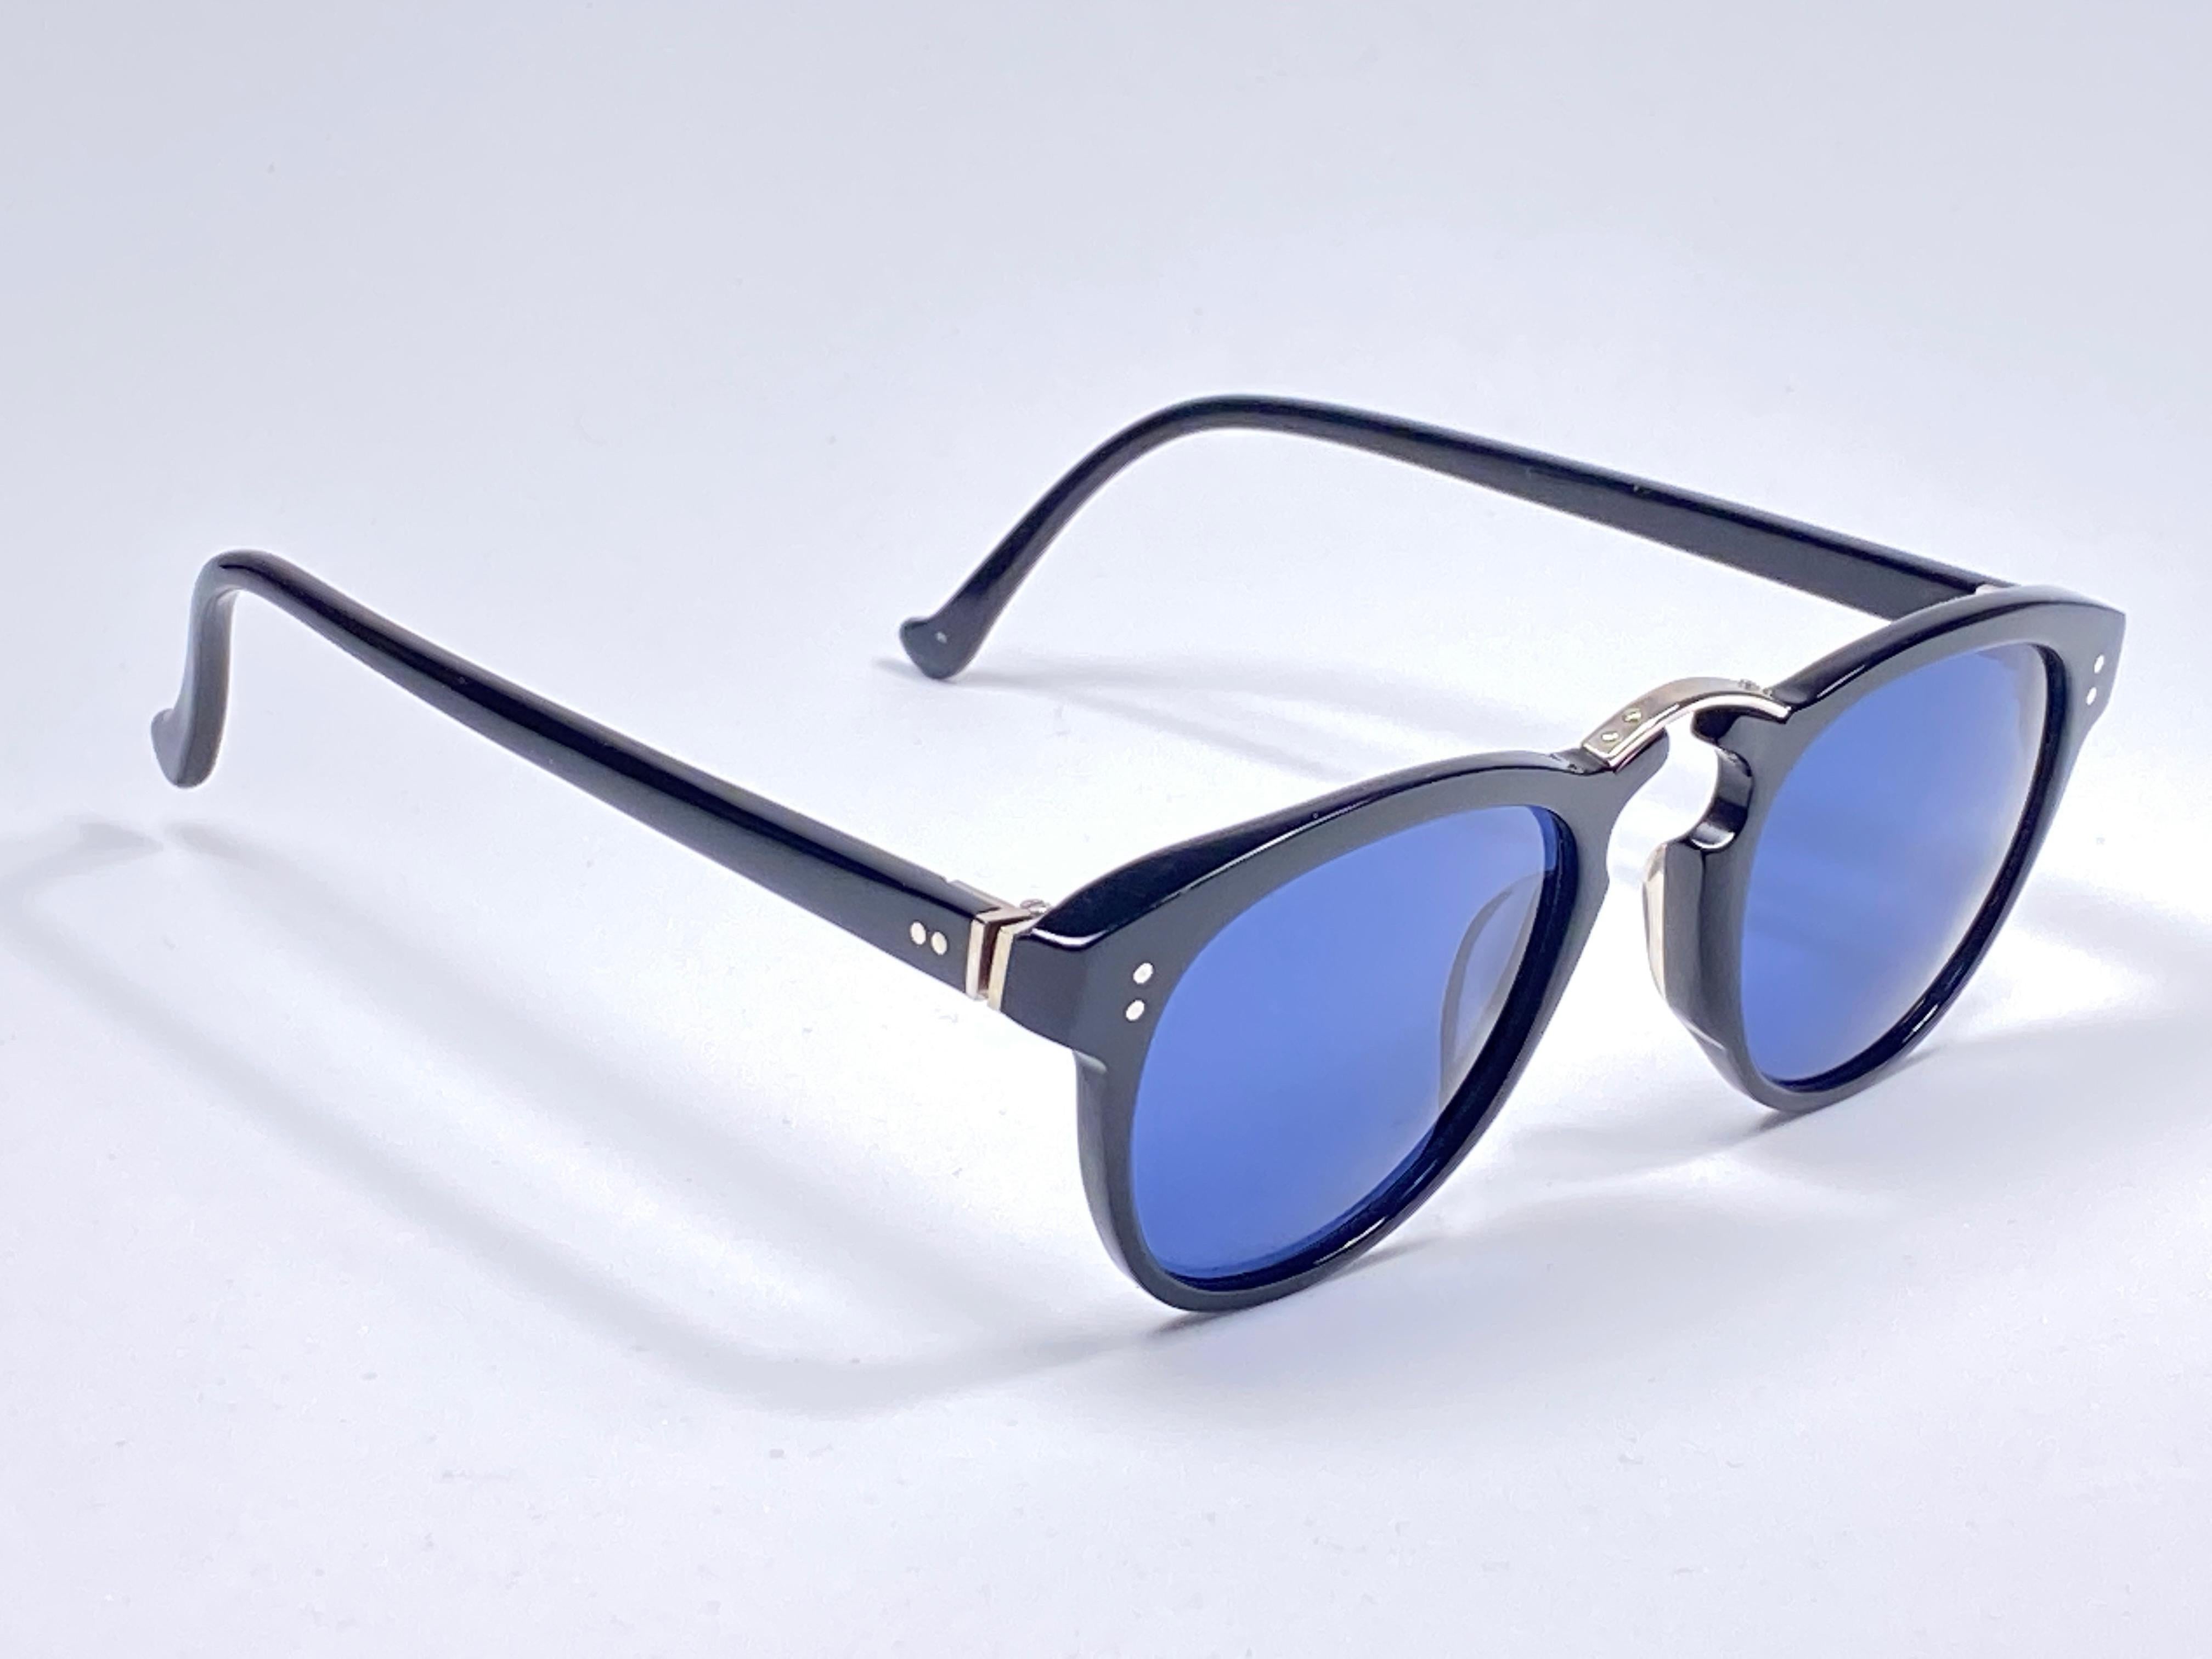 New Vintage Jean Paul Gaultier Junior medium frame in sleek black with silver accents.

Design and produced in the 1900's a timeless and iconic piece.
Minor sign of wear due to storage.
A true fashion statement.
